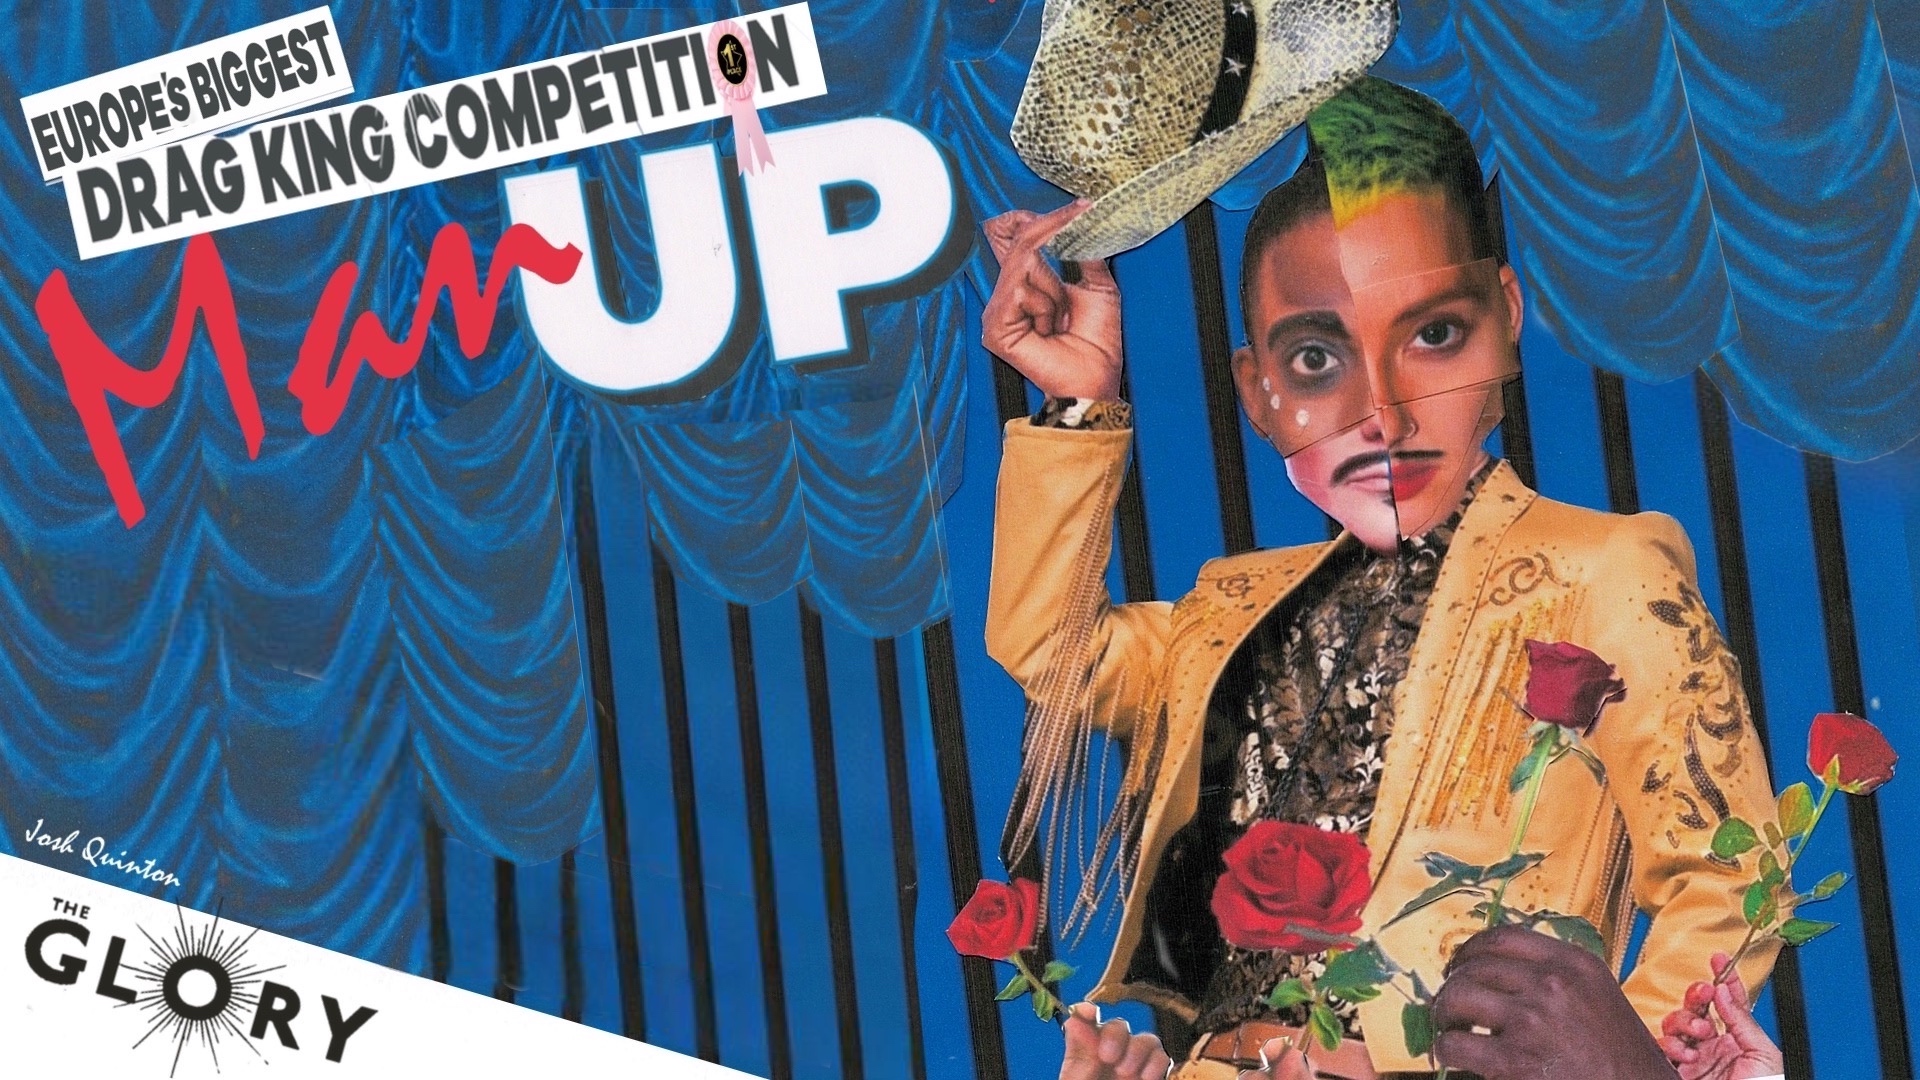 Man Up! Drag King Competition – HEAT 7